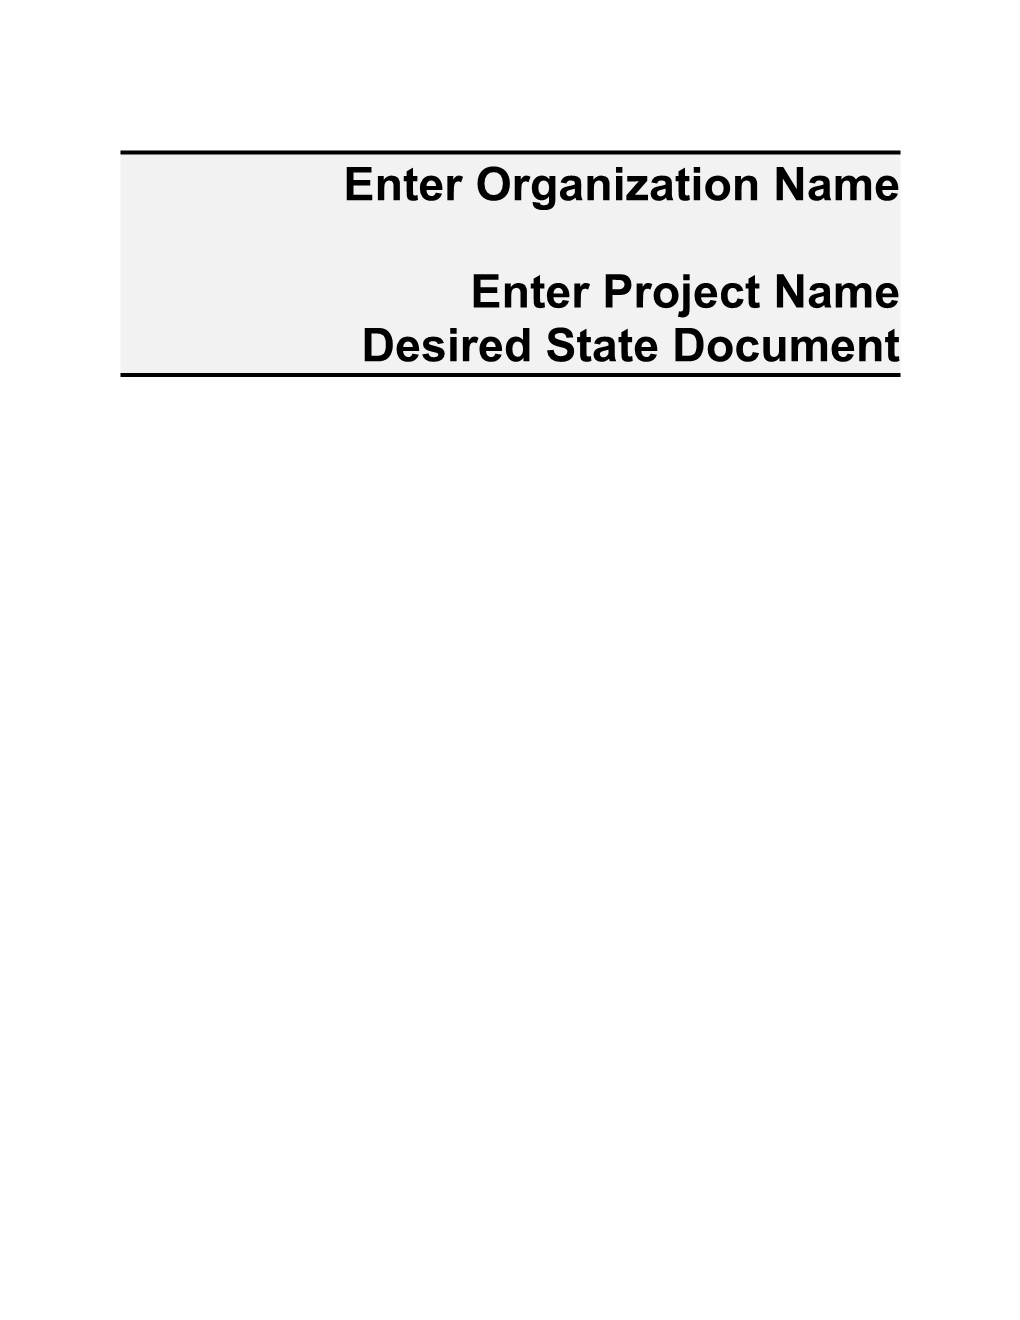 Desired State Document